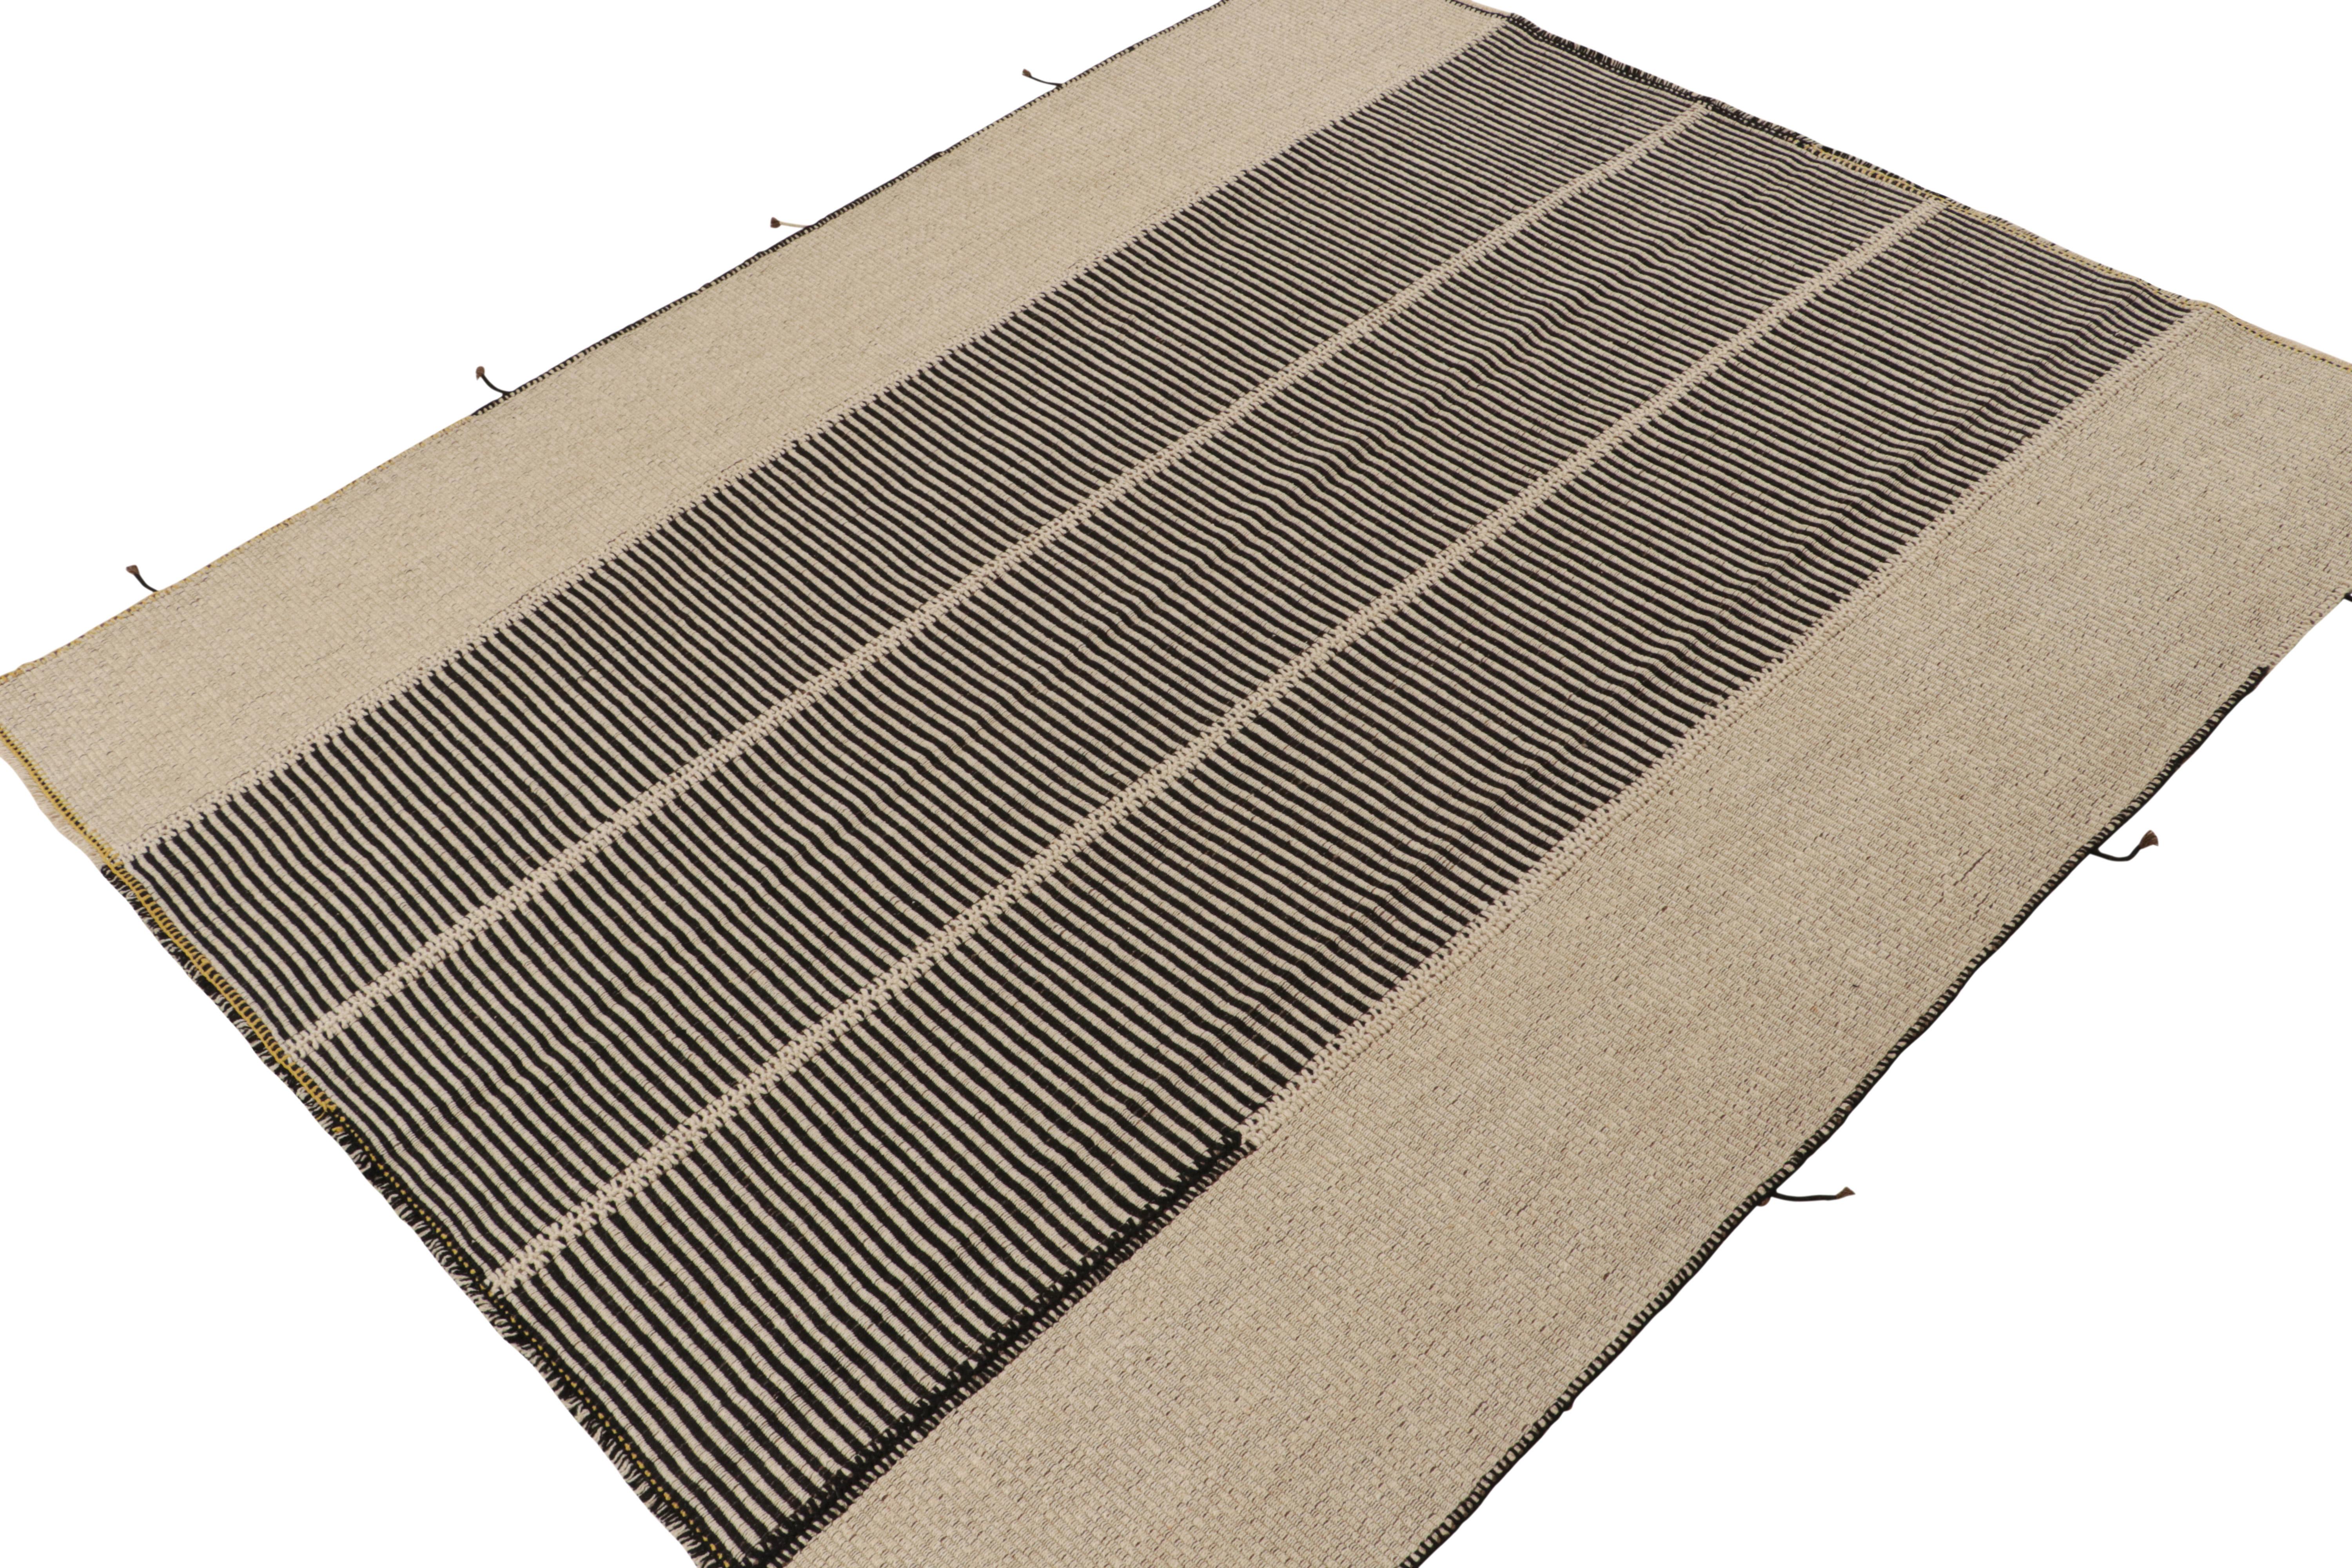 Persian Rug & Kilim’s Contemporary Kilim in Black & Beige Stripes with Brown Accents For Sale